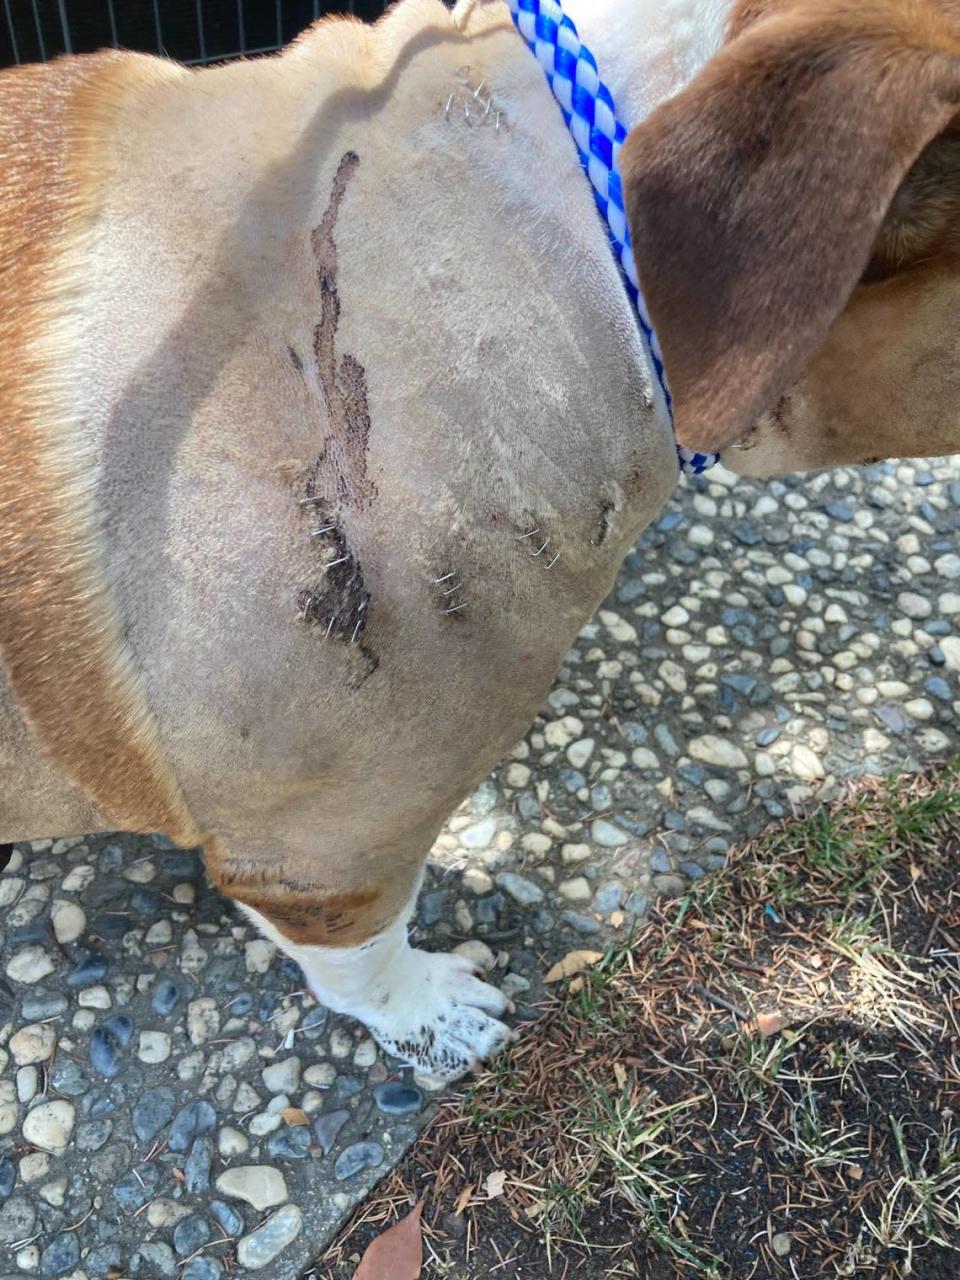 Roxy, a brown-and-white colored pit bull mix from Fresno, was stabbed 17 times all over her body during an attack on July 23 in Fresno. She managed to survive and two weeks later, gave birth to a litter of puppies.